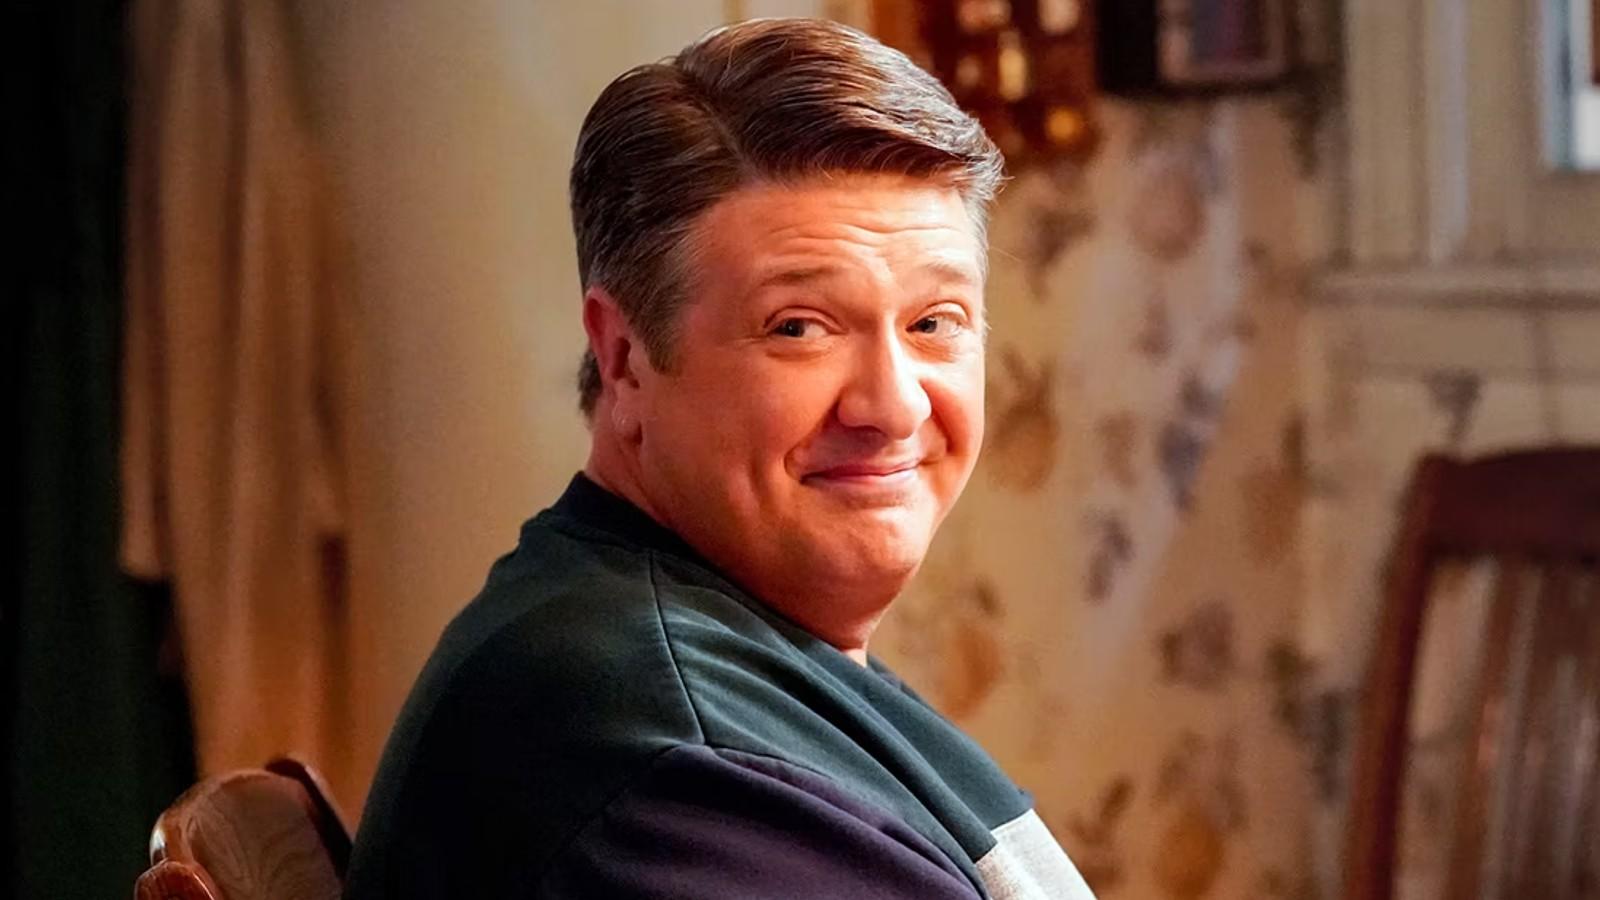 Lance Barber as George in Young Sheldon